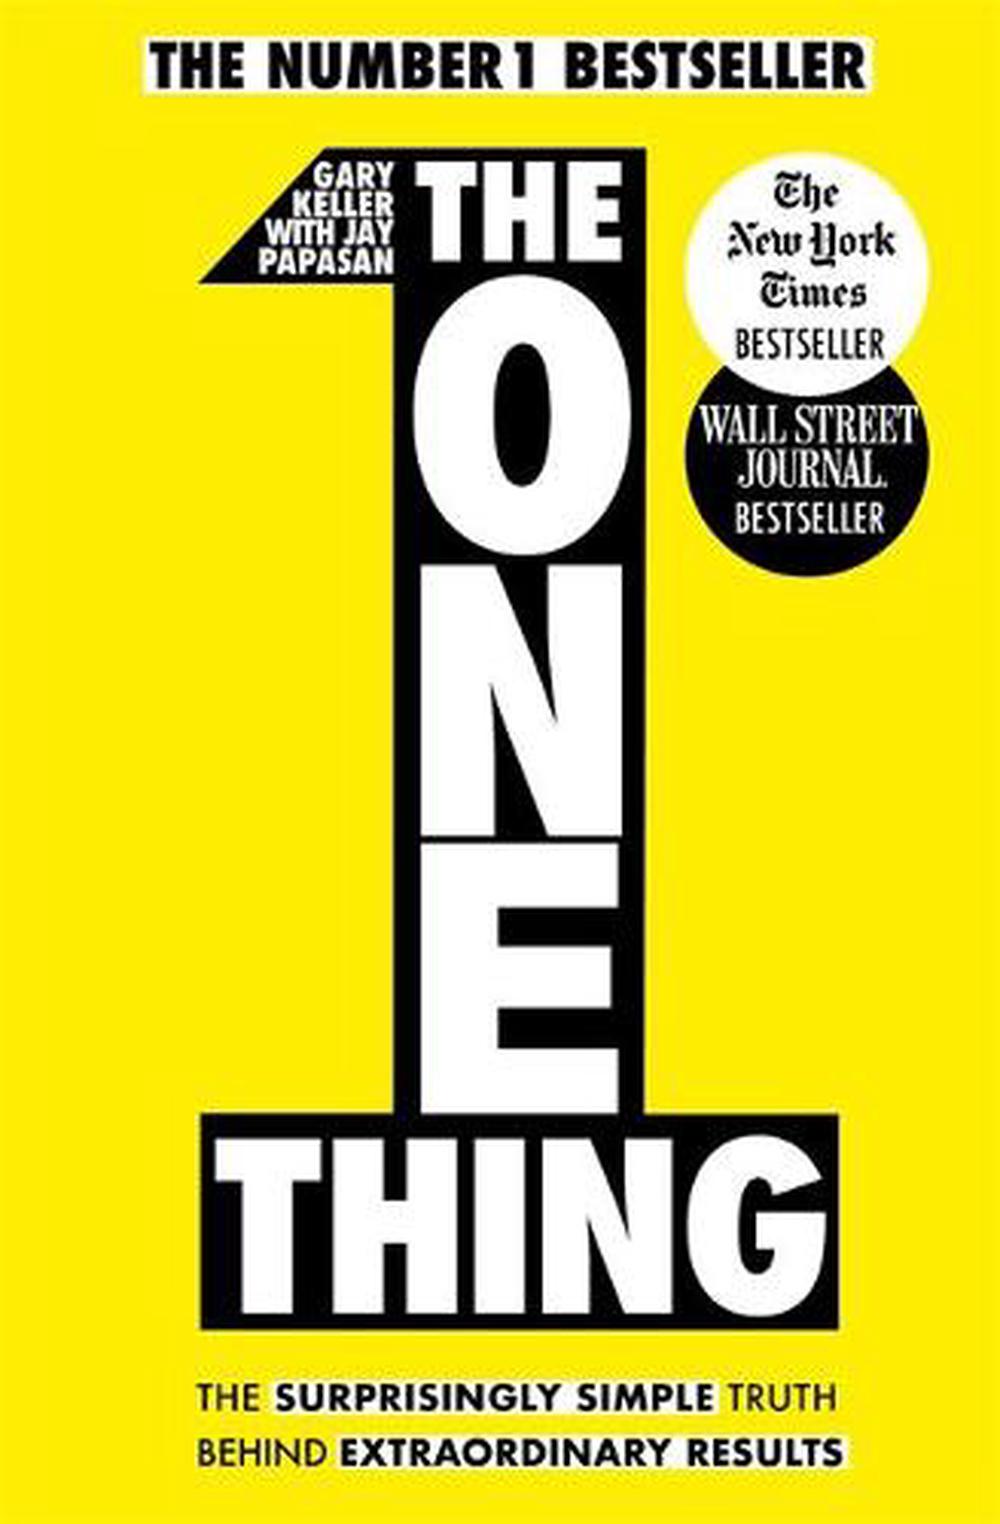 one-thing-by-gary-keller-paperback-9781848549258-buy-online-at-the-nile